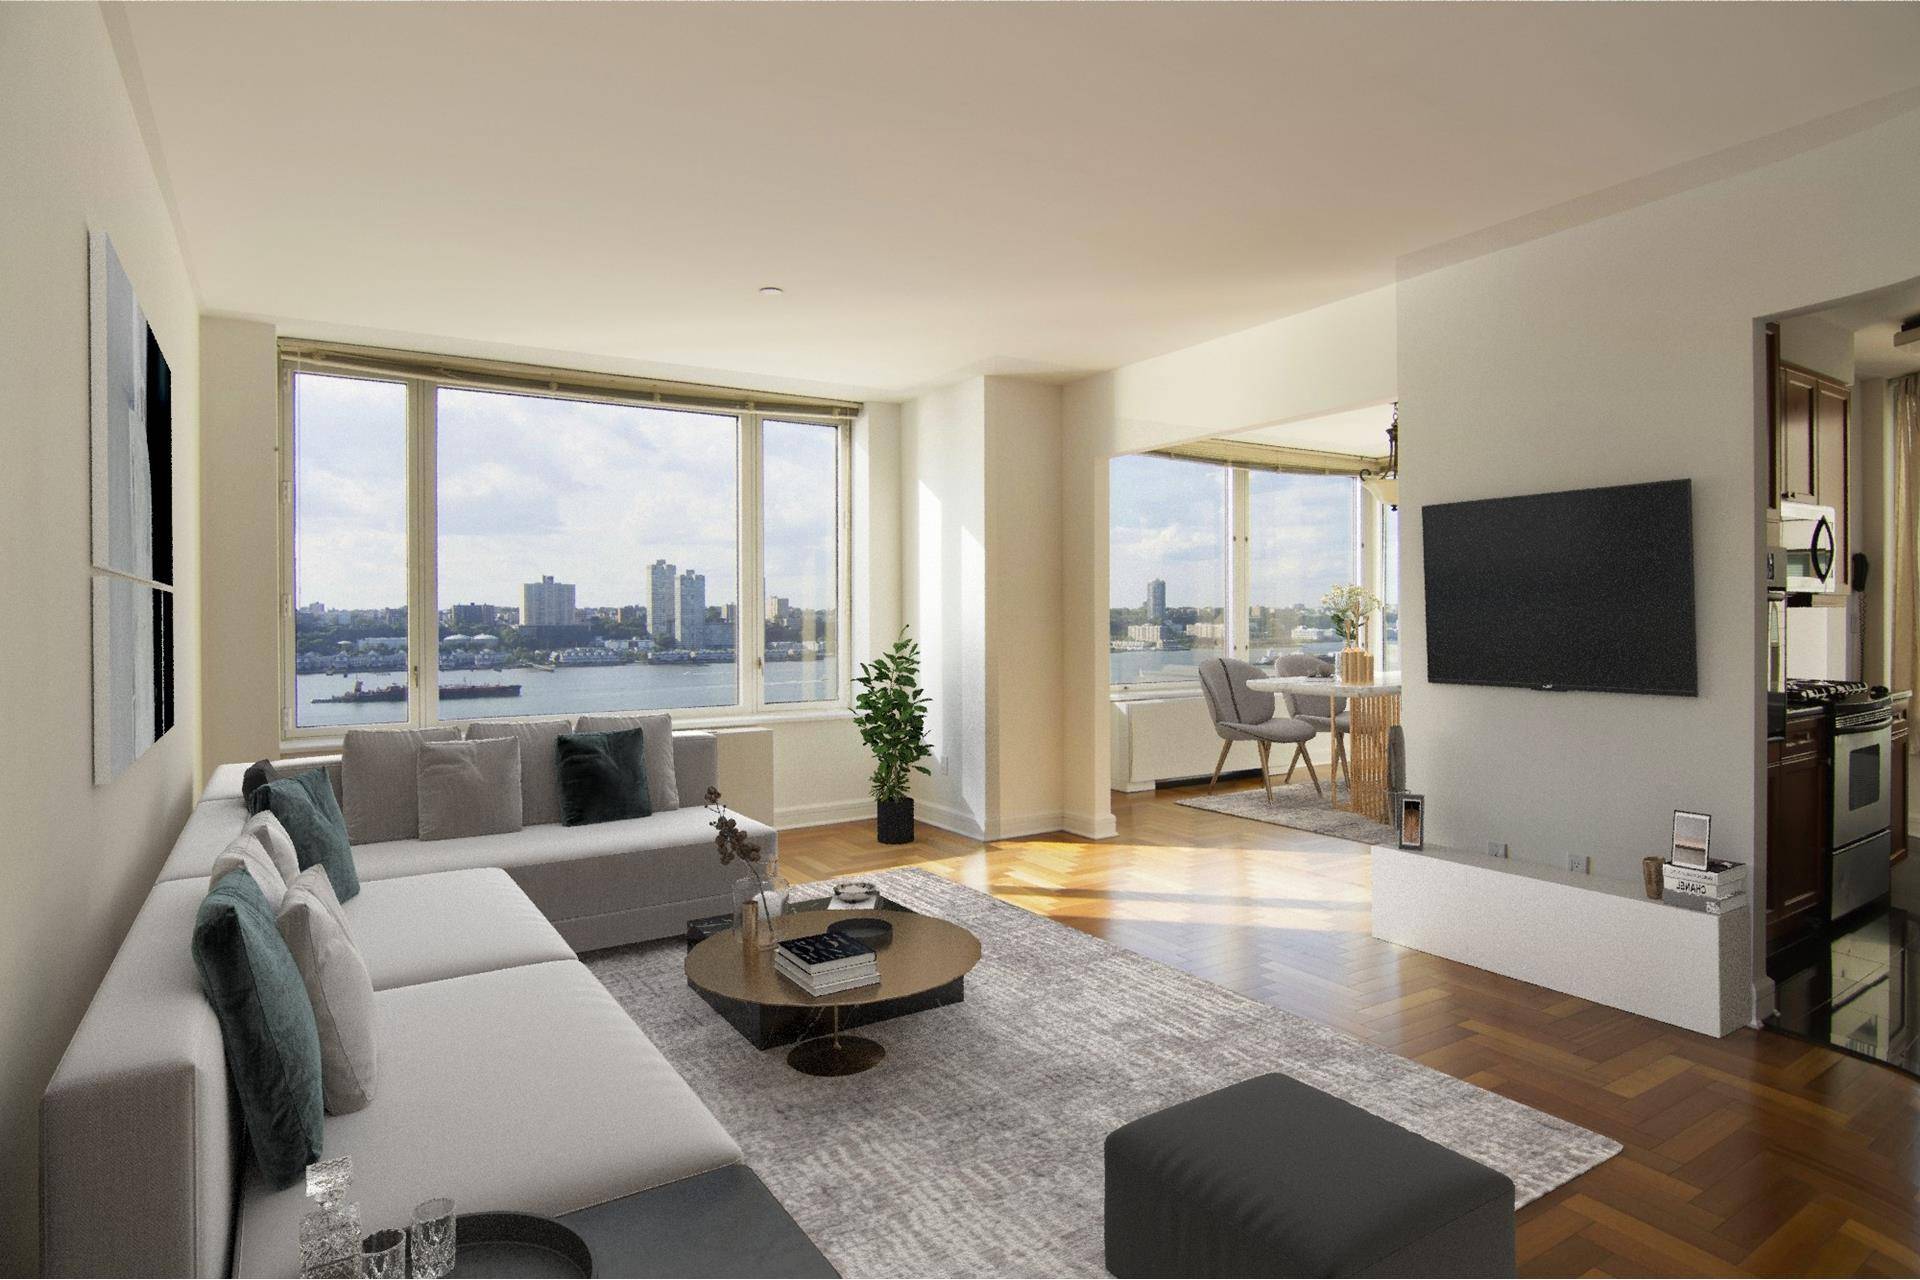 Corner freshly painted and professionally cleaned, magnificent 3 bedroom, 3 bath apartment with stunning Hudson River VIEWS to the West and infinity views to the North.